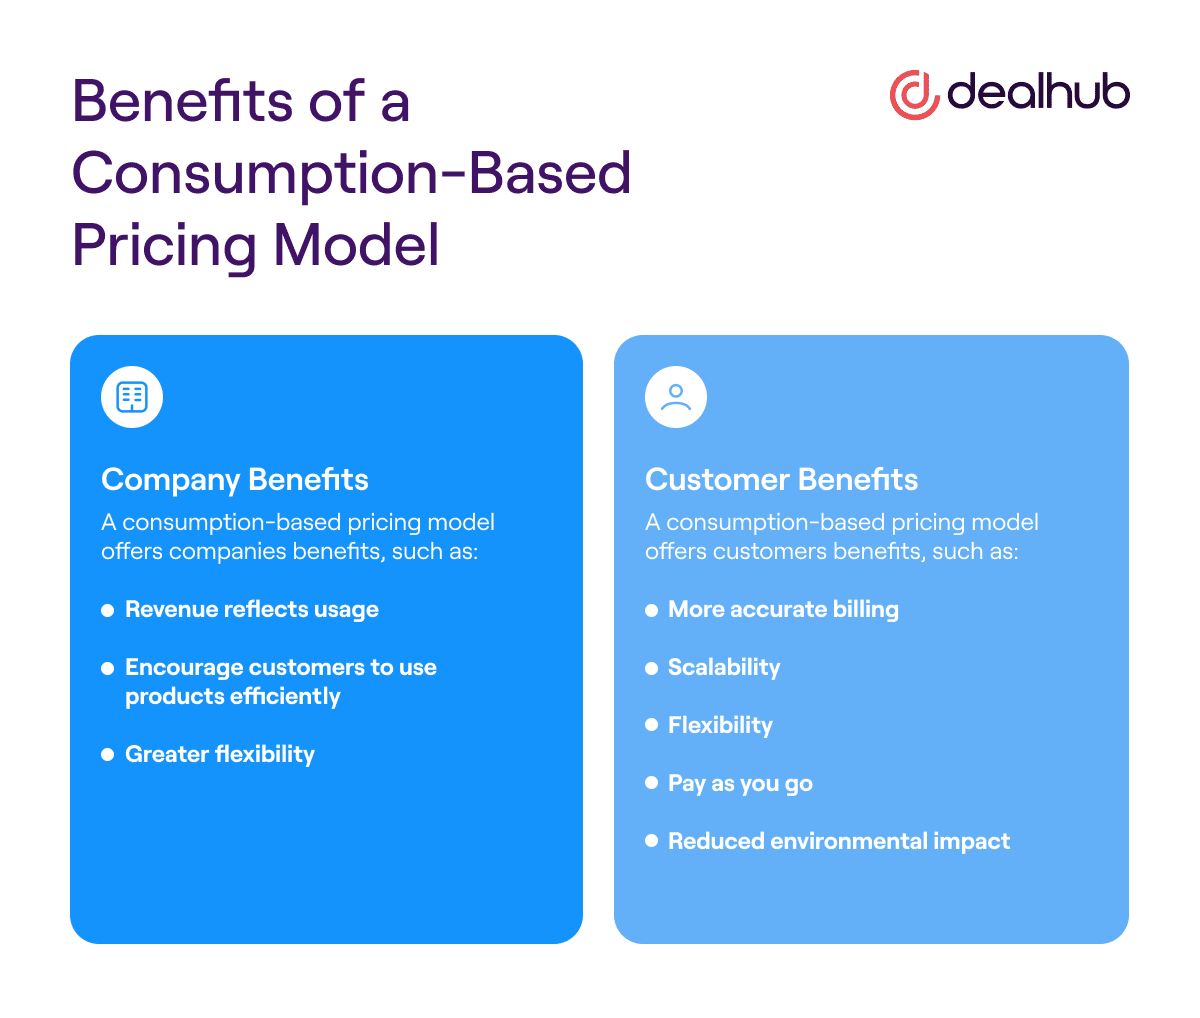 Benefits of a Consumption-Based Pricing Model